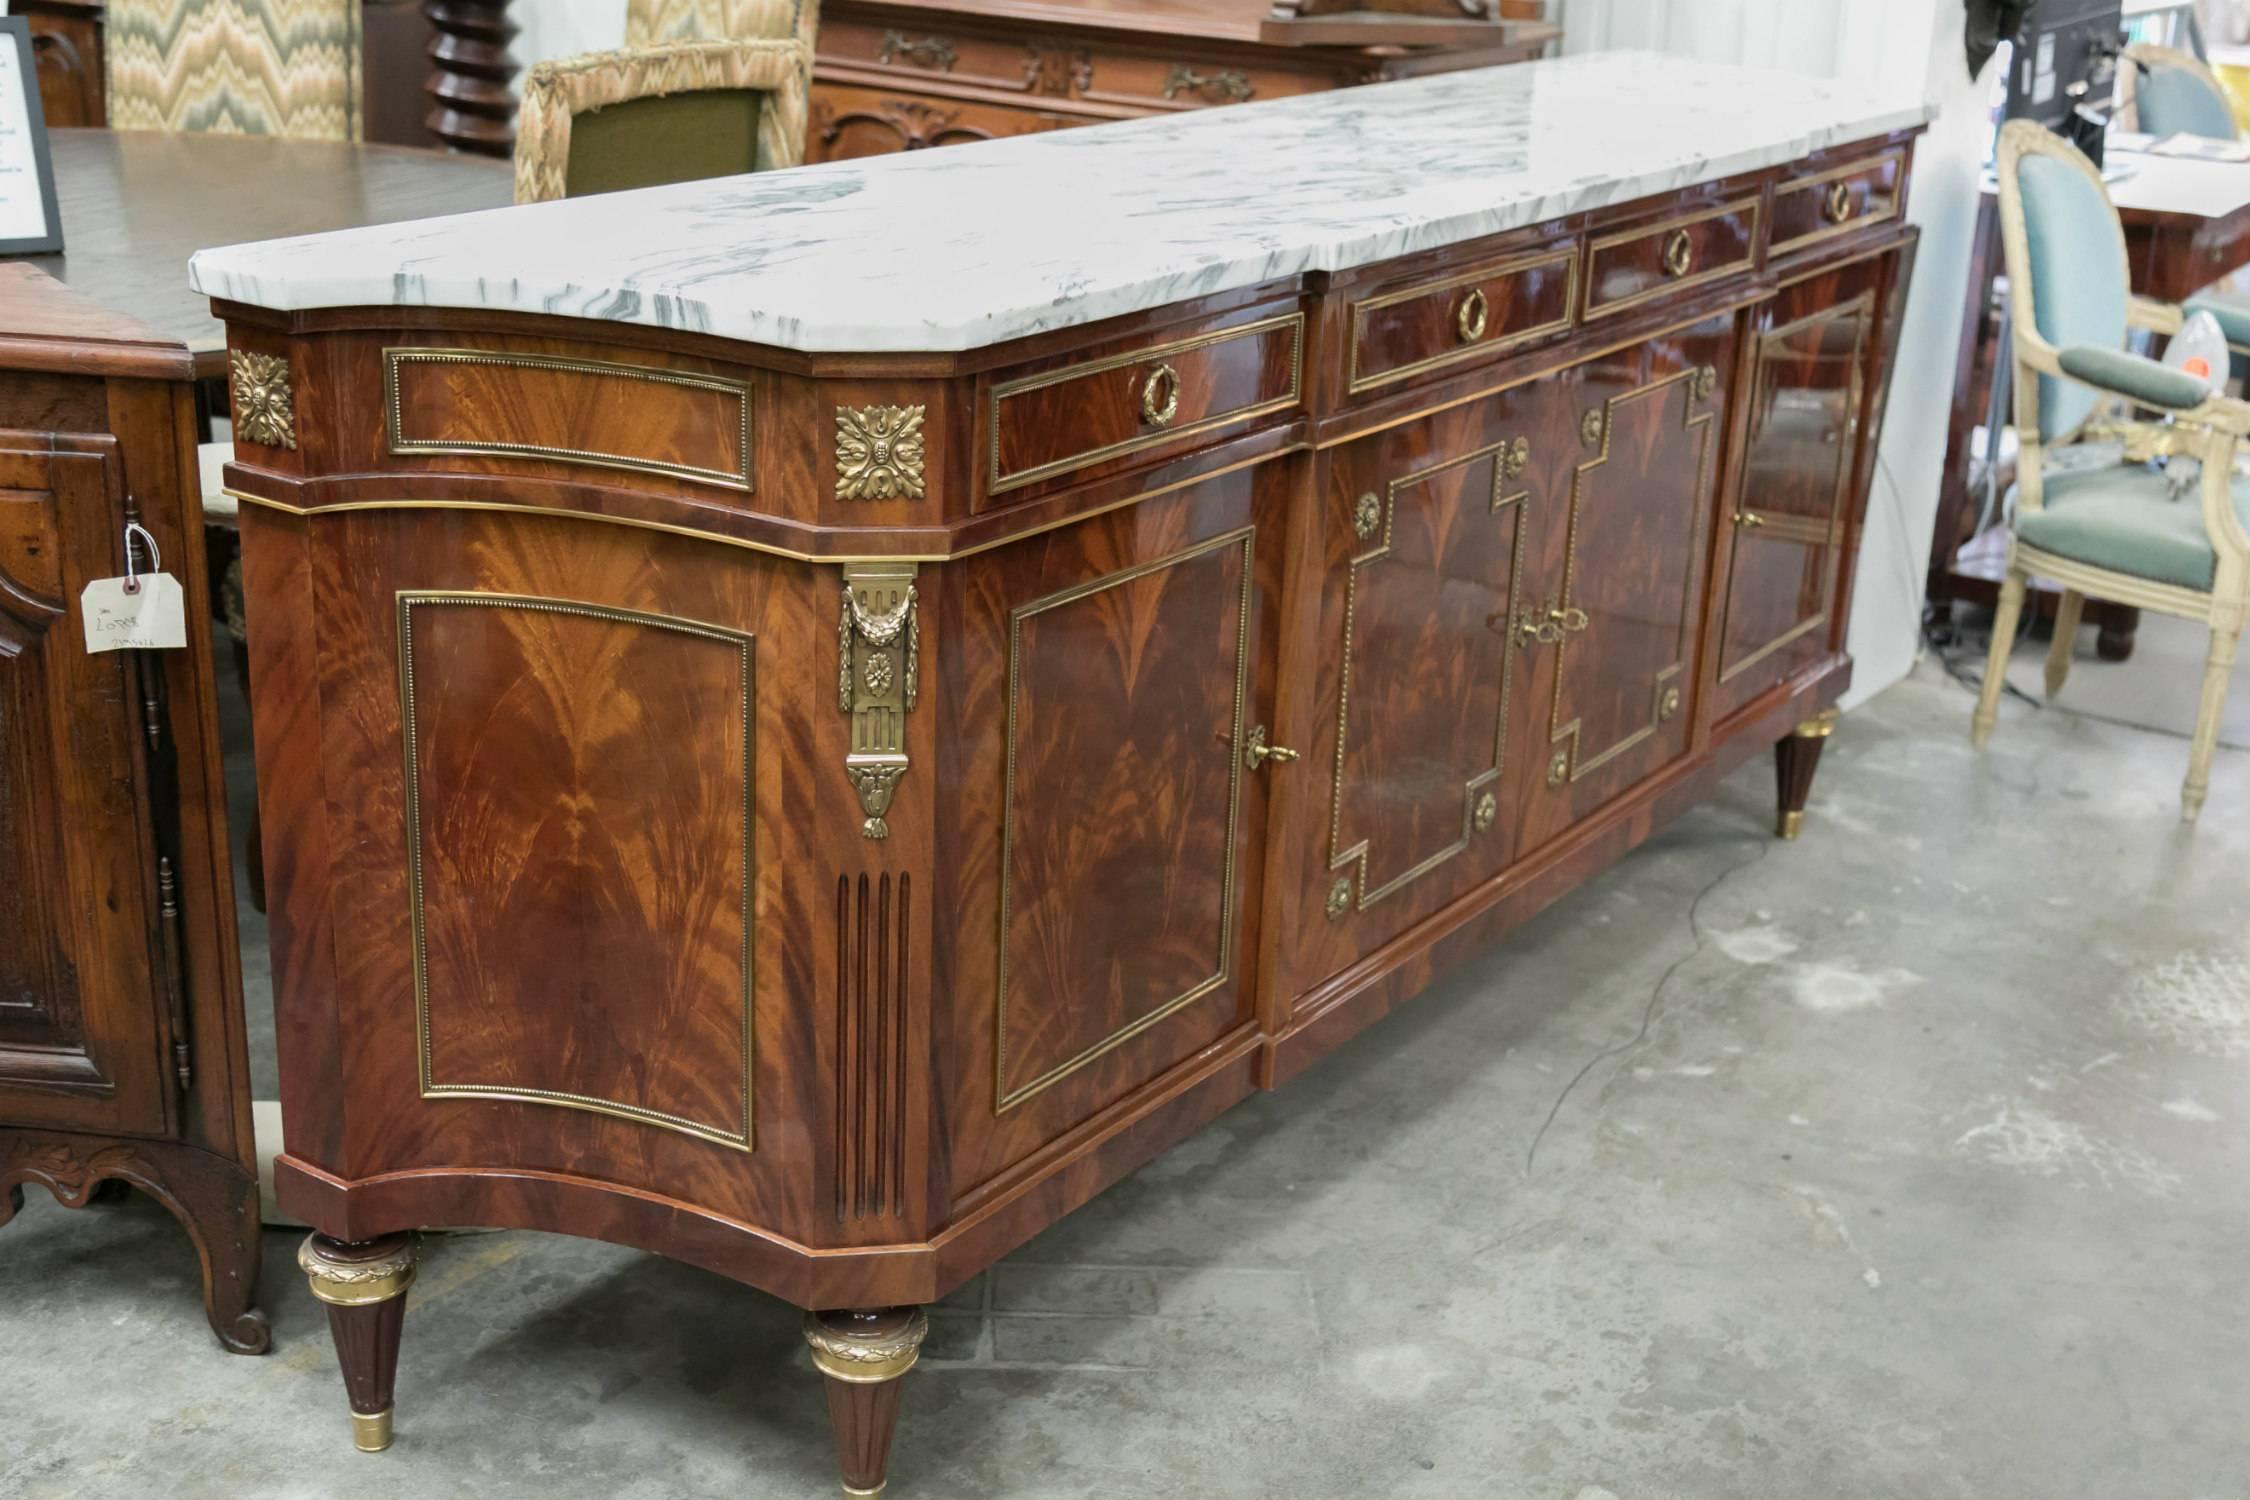 An exceptional and stunning French Louis XVI style enfilade of solid Cuban flamed mahogany with a bookmatched front, having a lustrous French polish, the original thick, moulded Carrara marble top and finely chased bronze ormolu mounts and brass